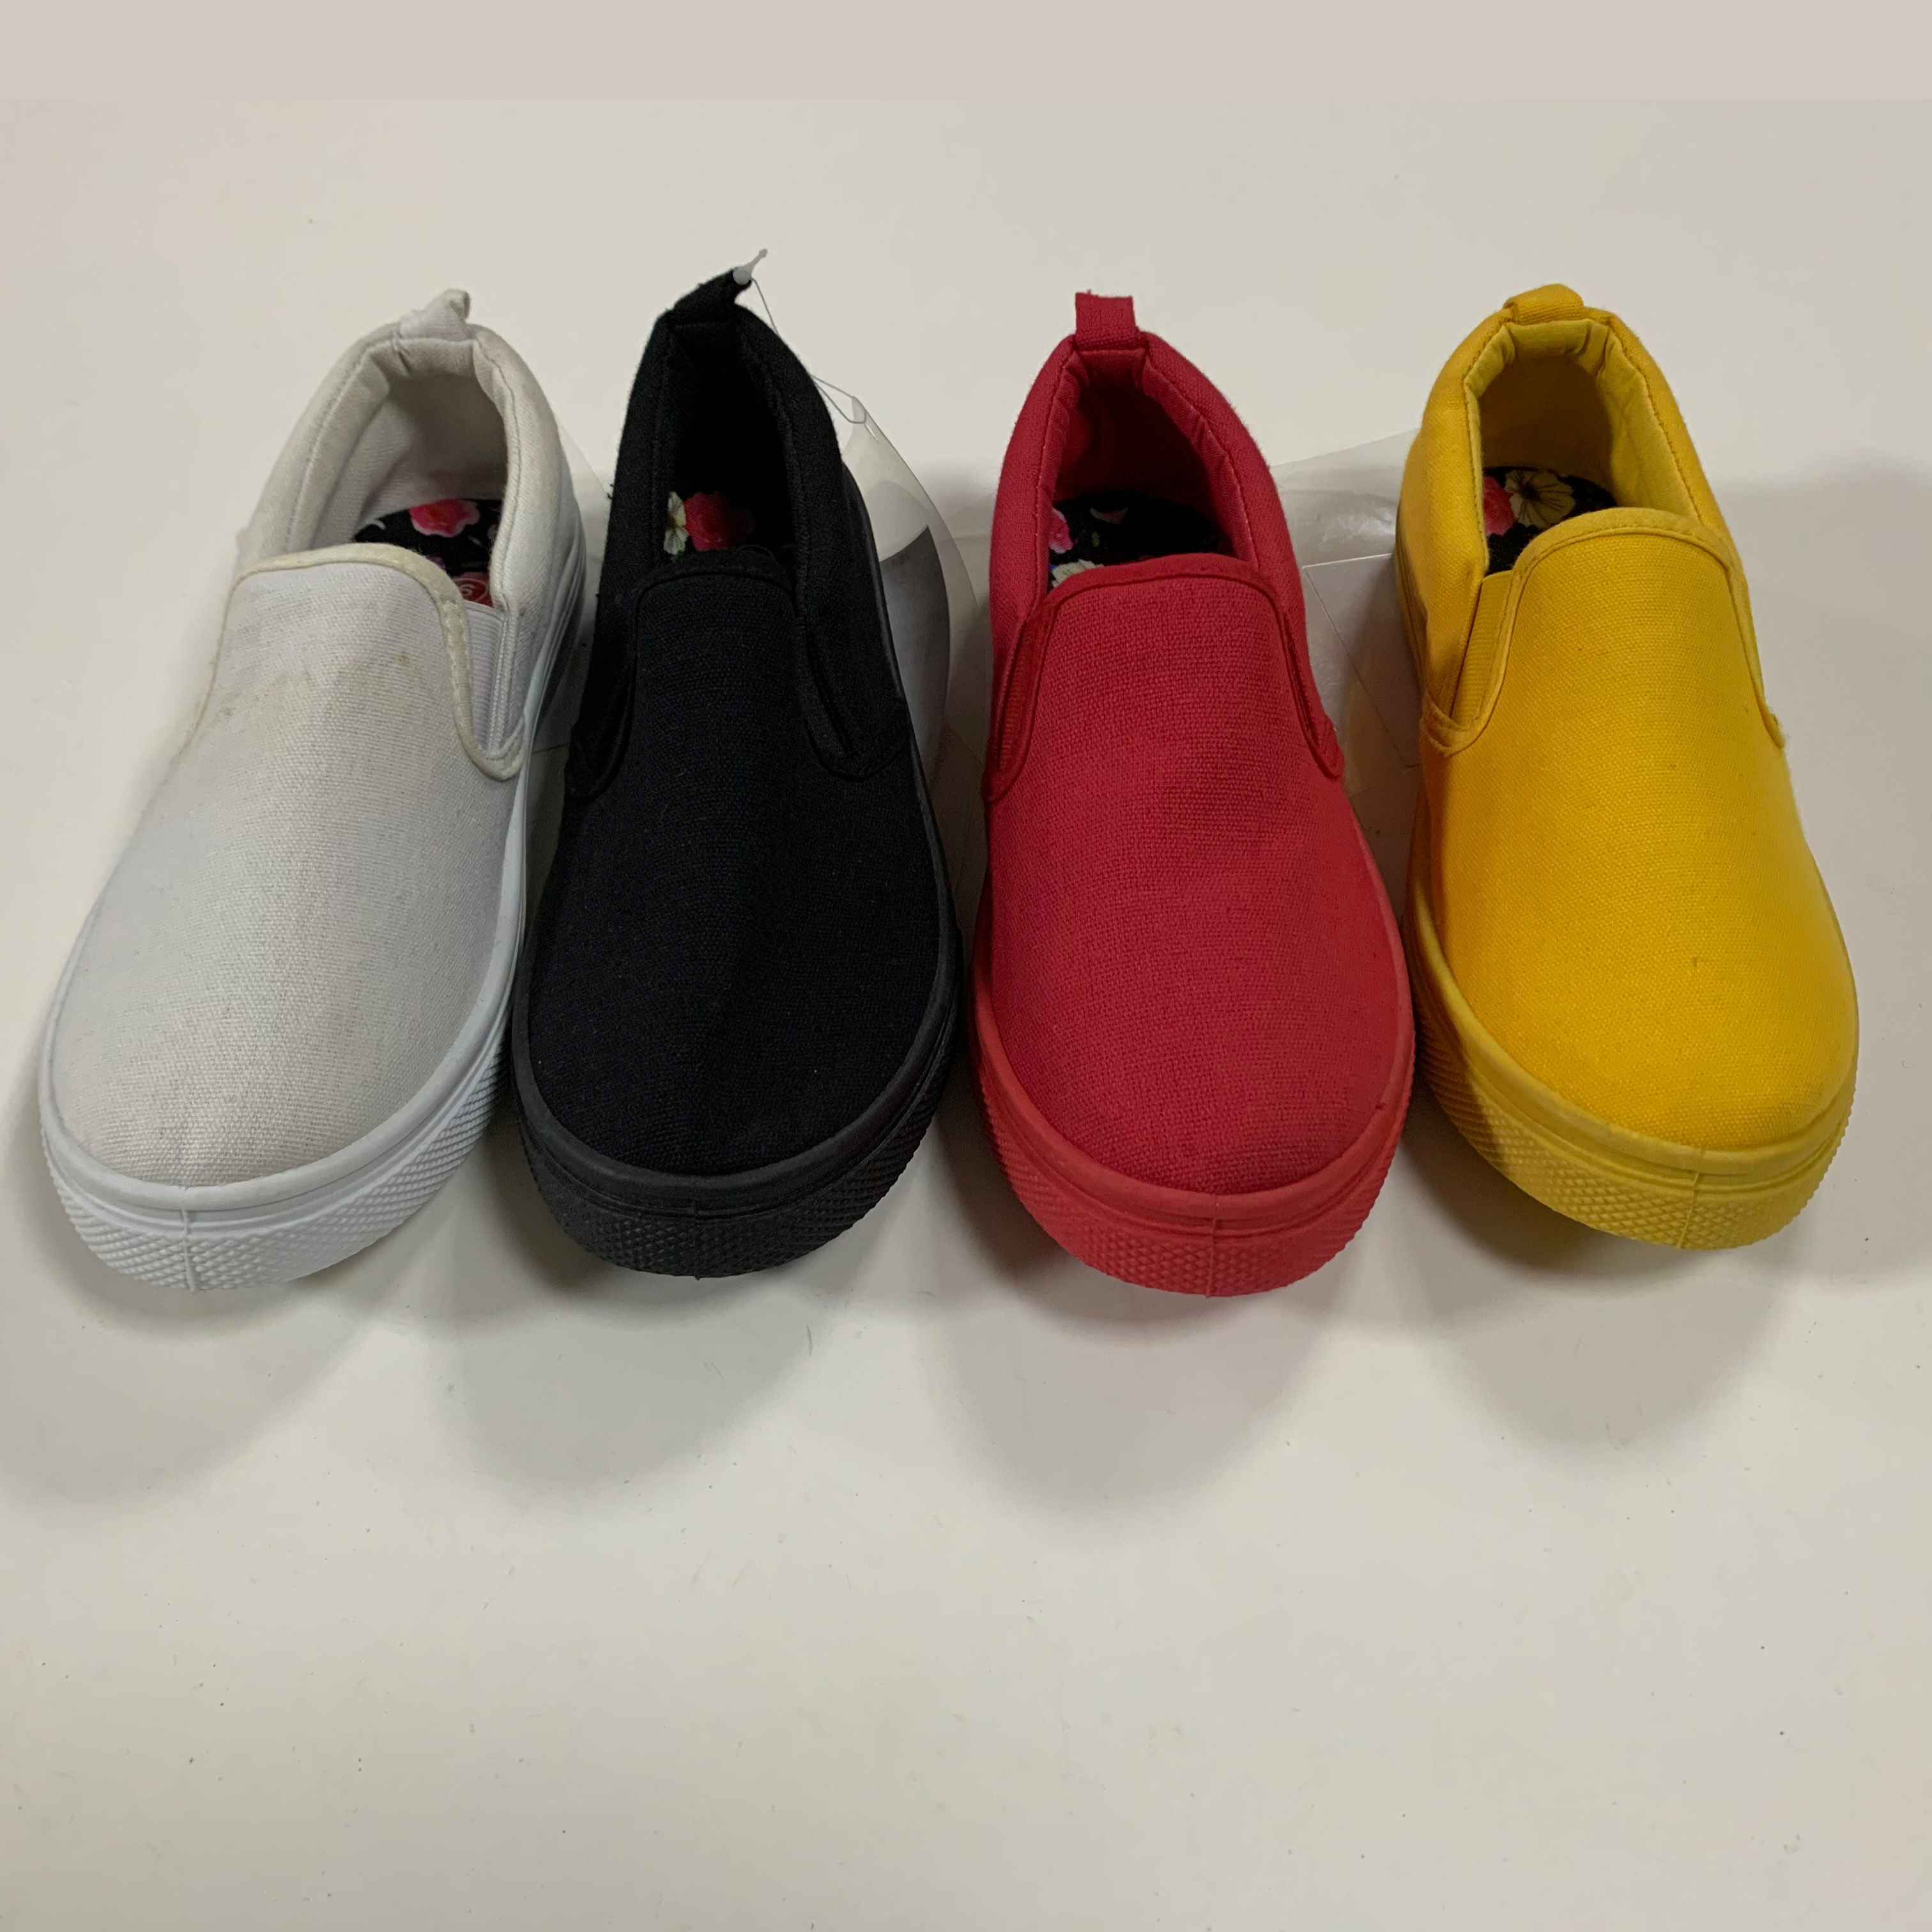 Women's Casual Shoes Slip On Sneakers